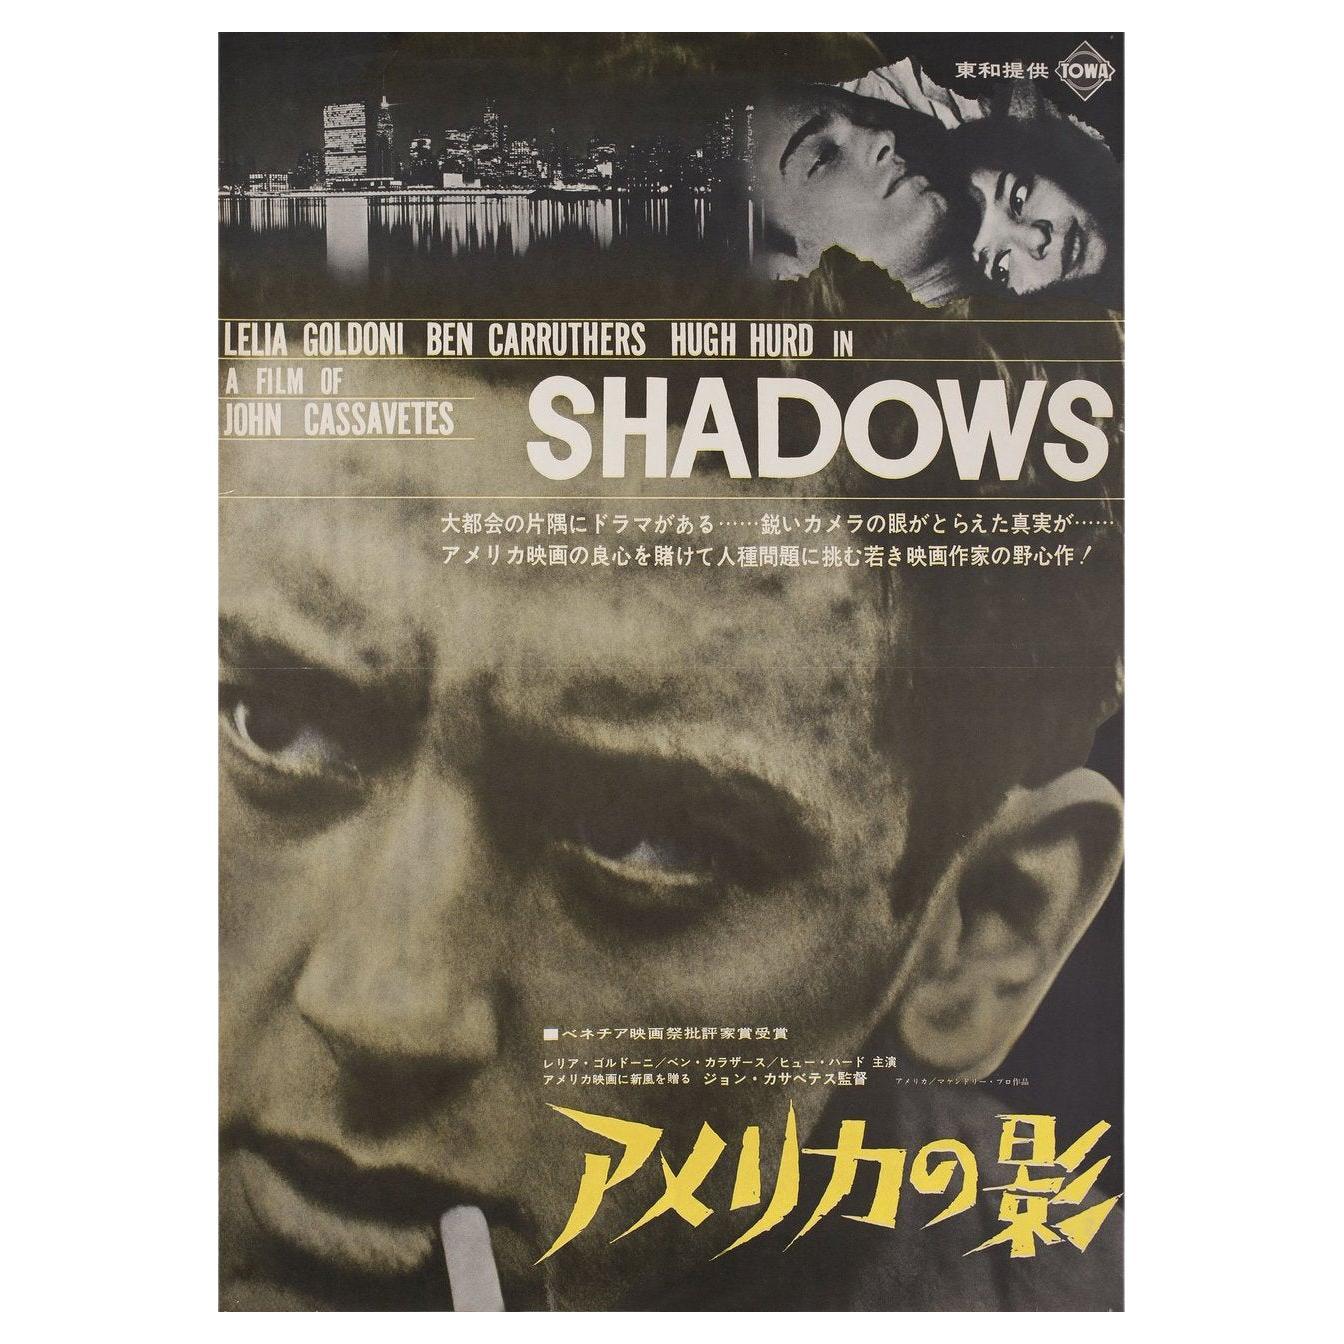 Shadows 1959 Japanese B2 Film Poster For Sale